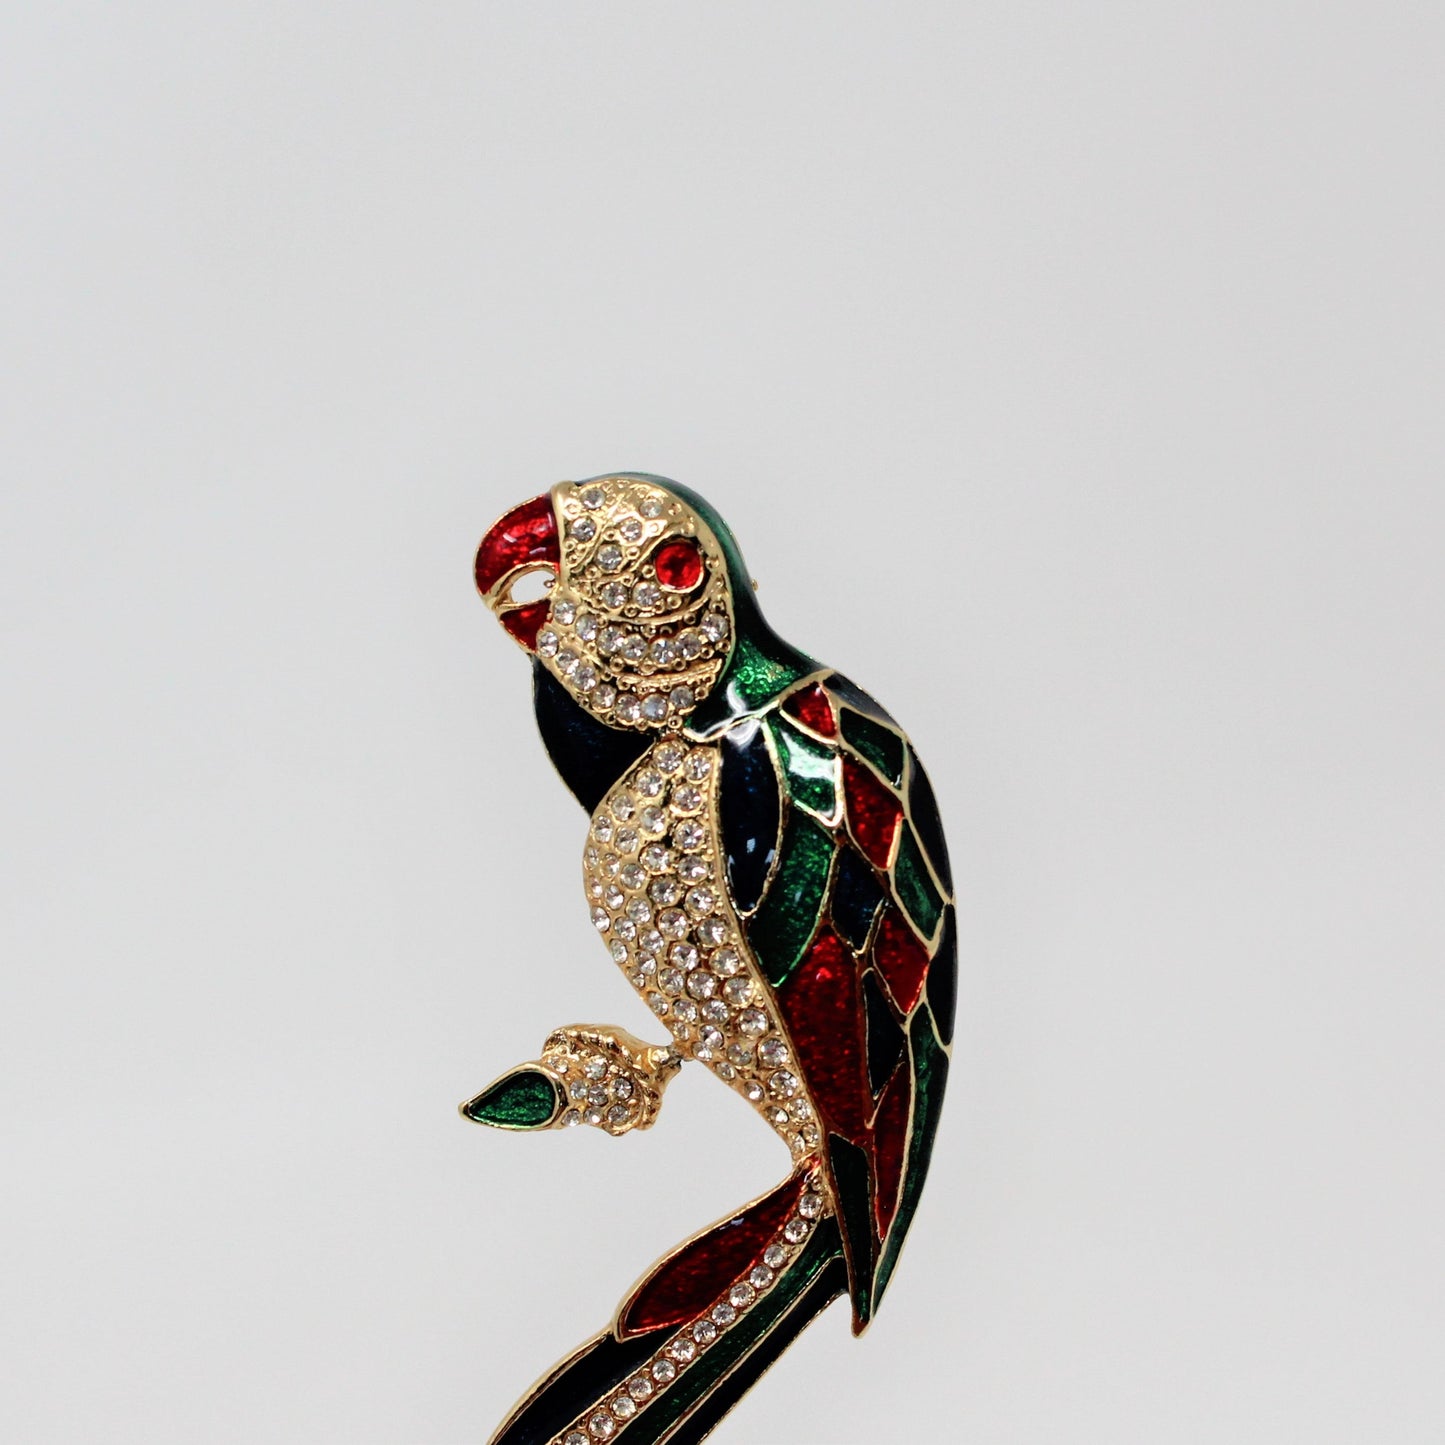 Brooch / Pin, Bird / Parrot / Macaw,  Blue, Red & Green Enamel with Rhinestones